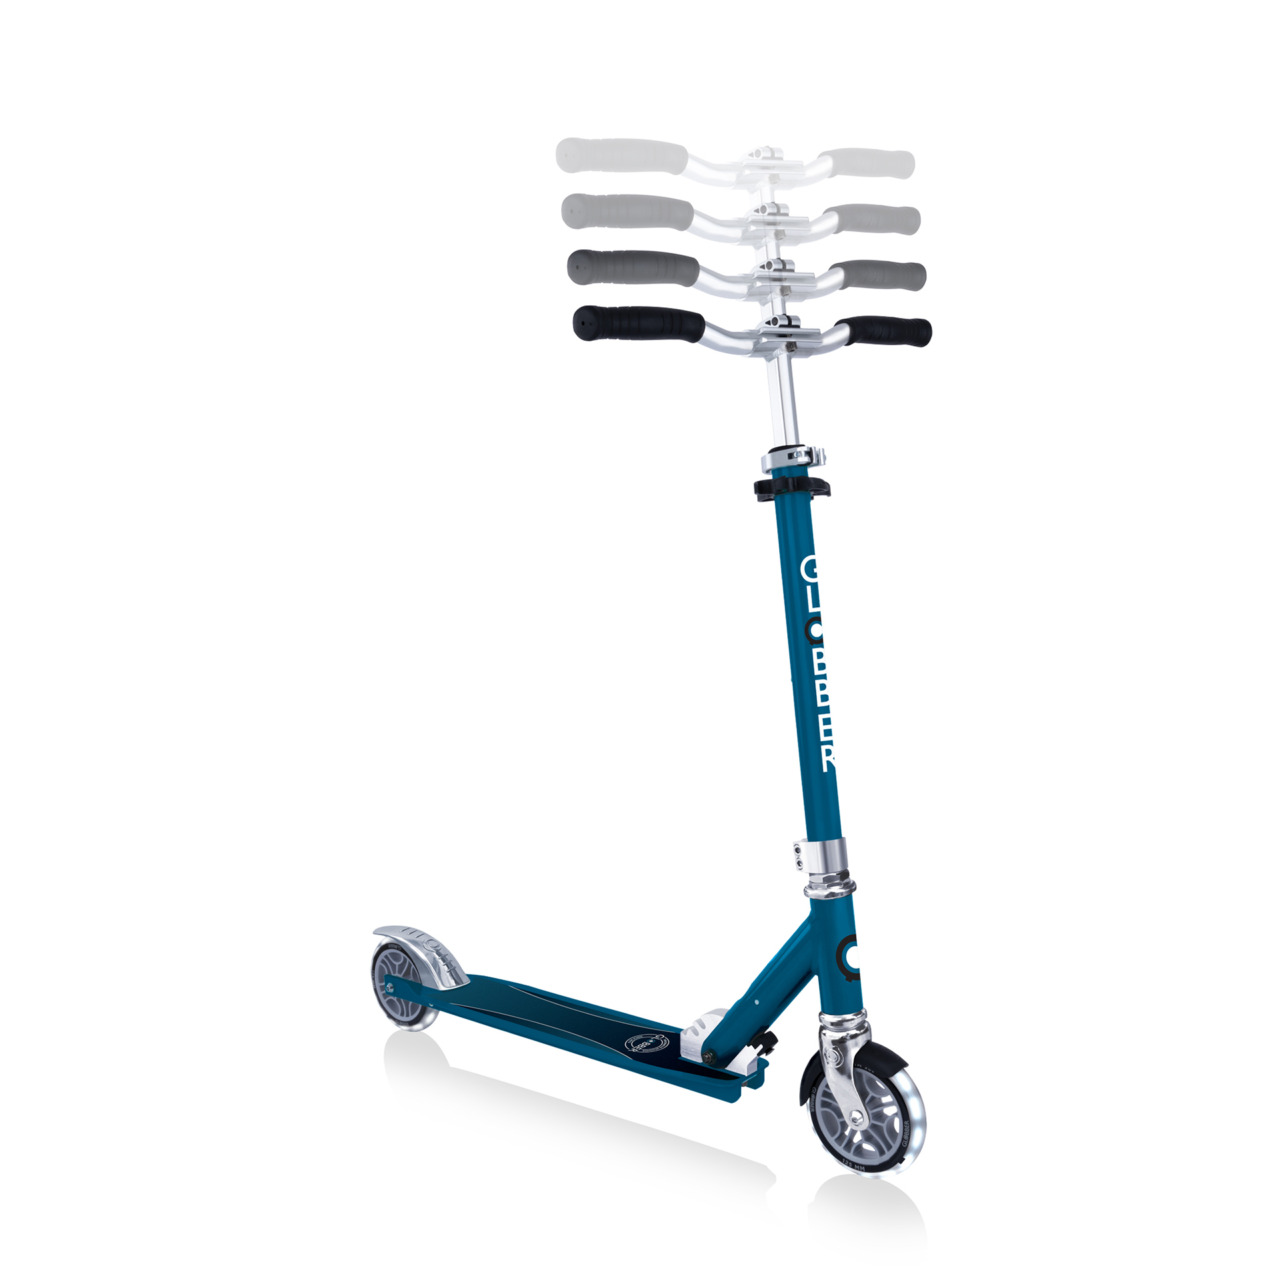 721 300 Height Adjustable Light Up Scooter